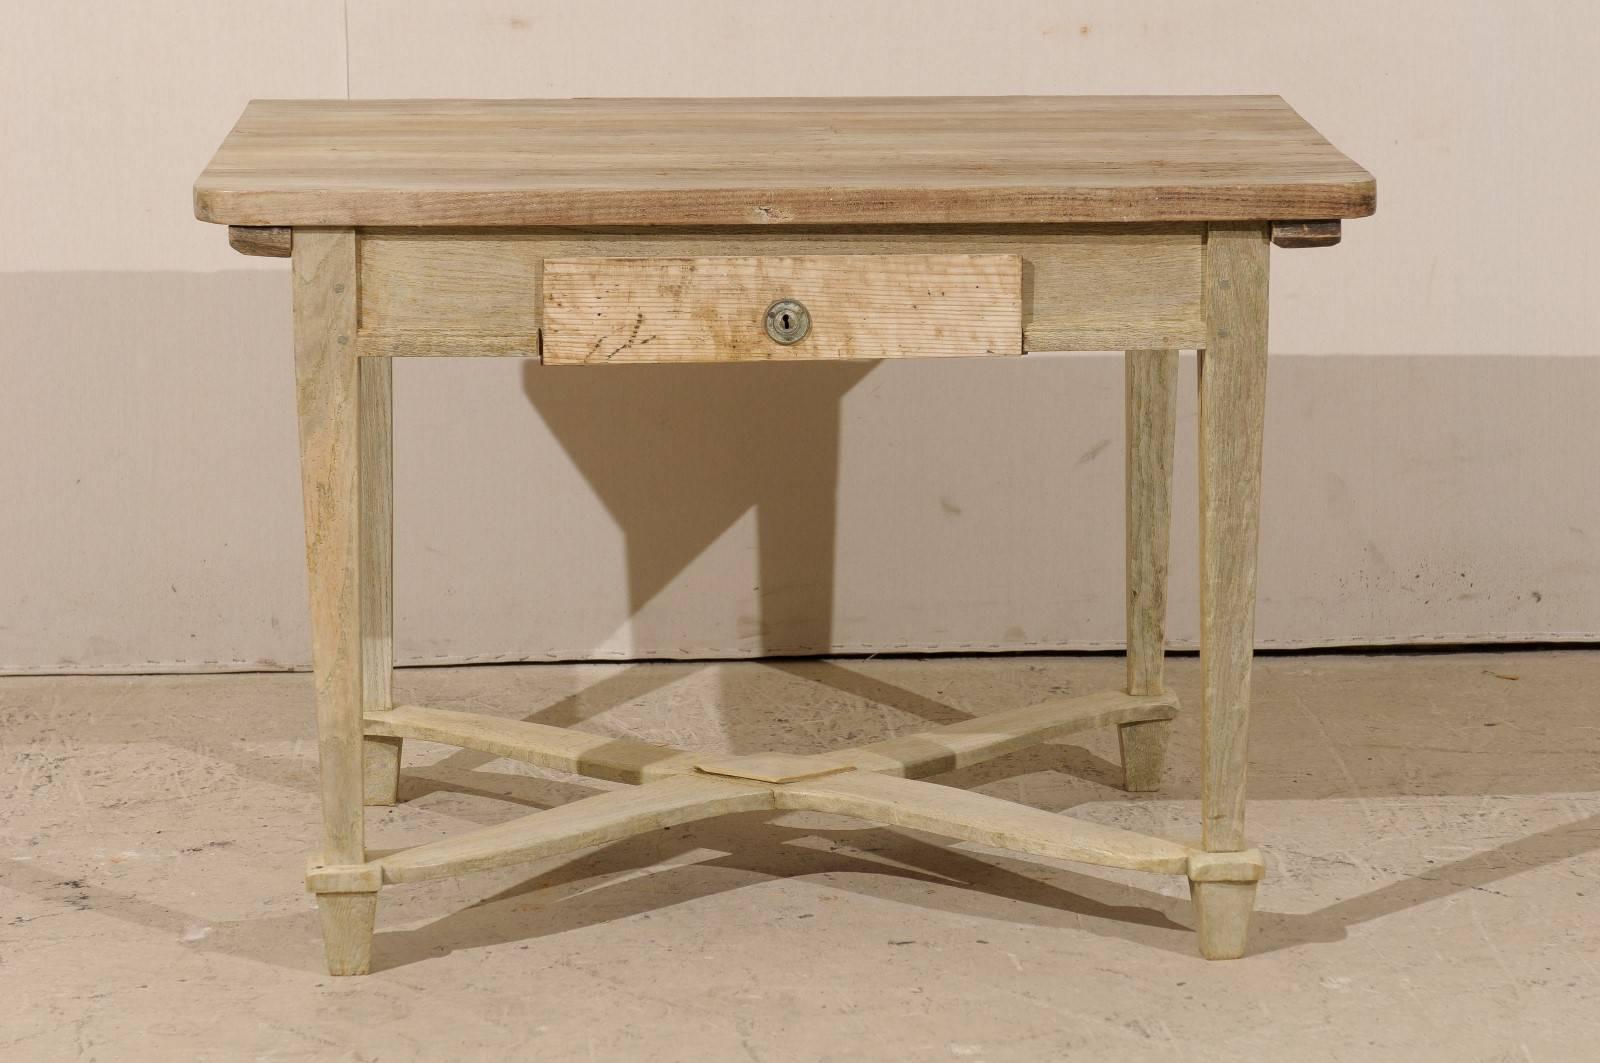 A Belgian 19th century side table or desk. This Belgian rectangular table features a single drawer, nice clean lines, slightly tapered legs with a center cross stretcher that features a diamond motif in its center. This medium sized table would also